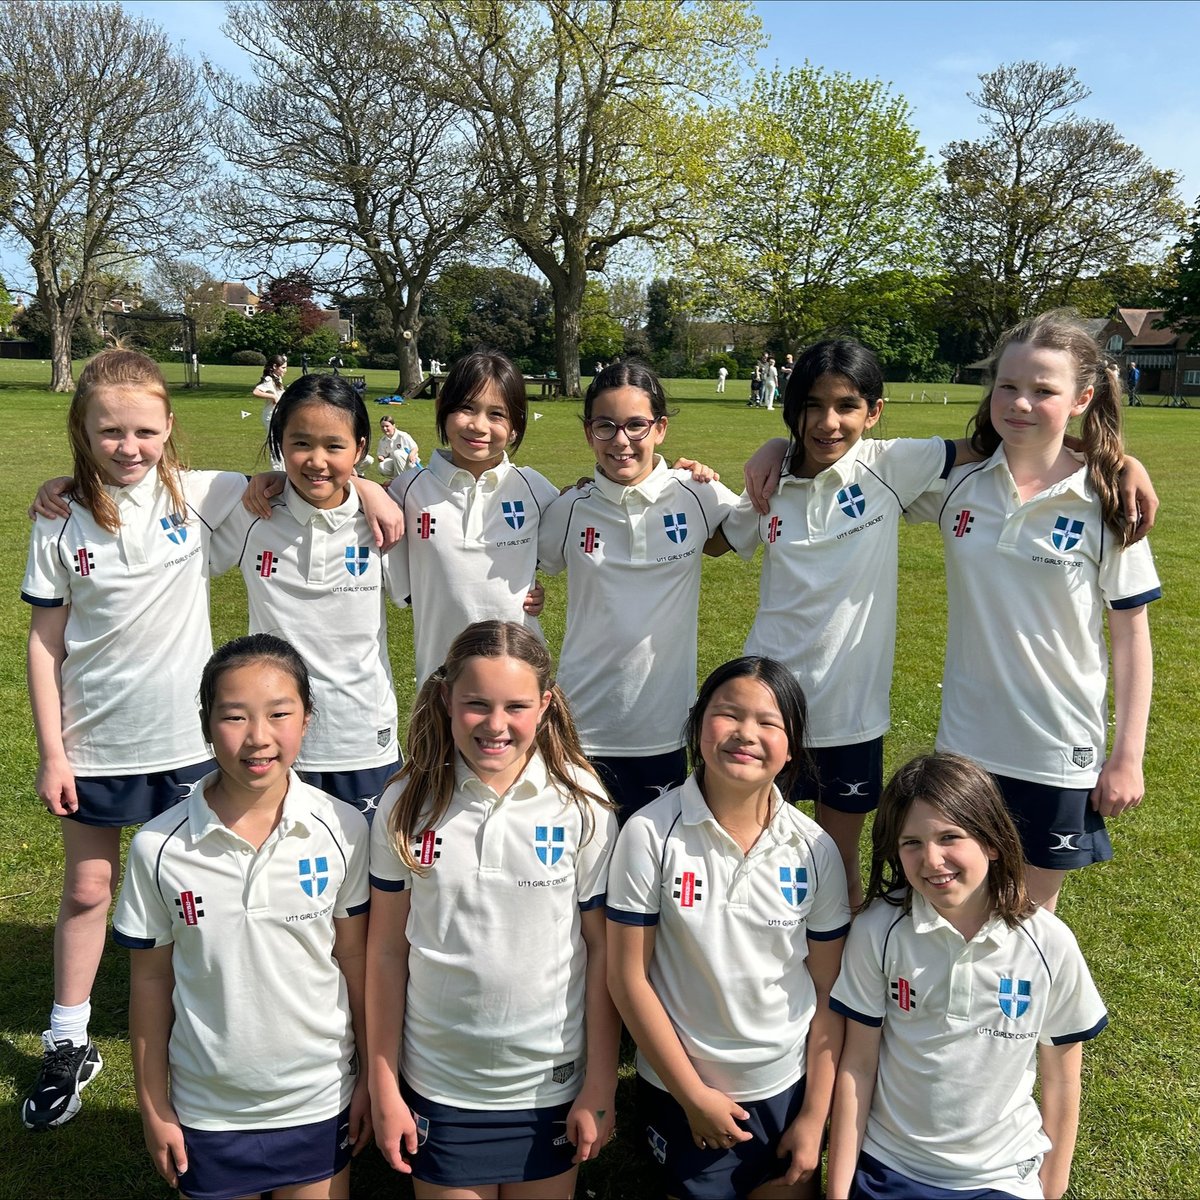 🏏Congratulations to the U11A team for their fantastic victory, winning by 34 runs in their match yesterday! It was a glorious afternoon and for the first time this term, it was the perfect cricket weather. Well done to all the players for their hard work and dedication!🏏